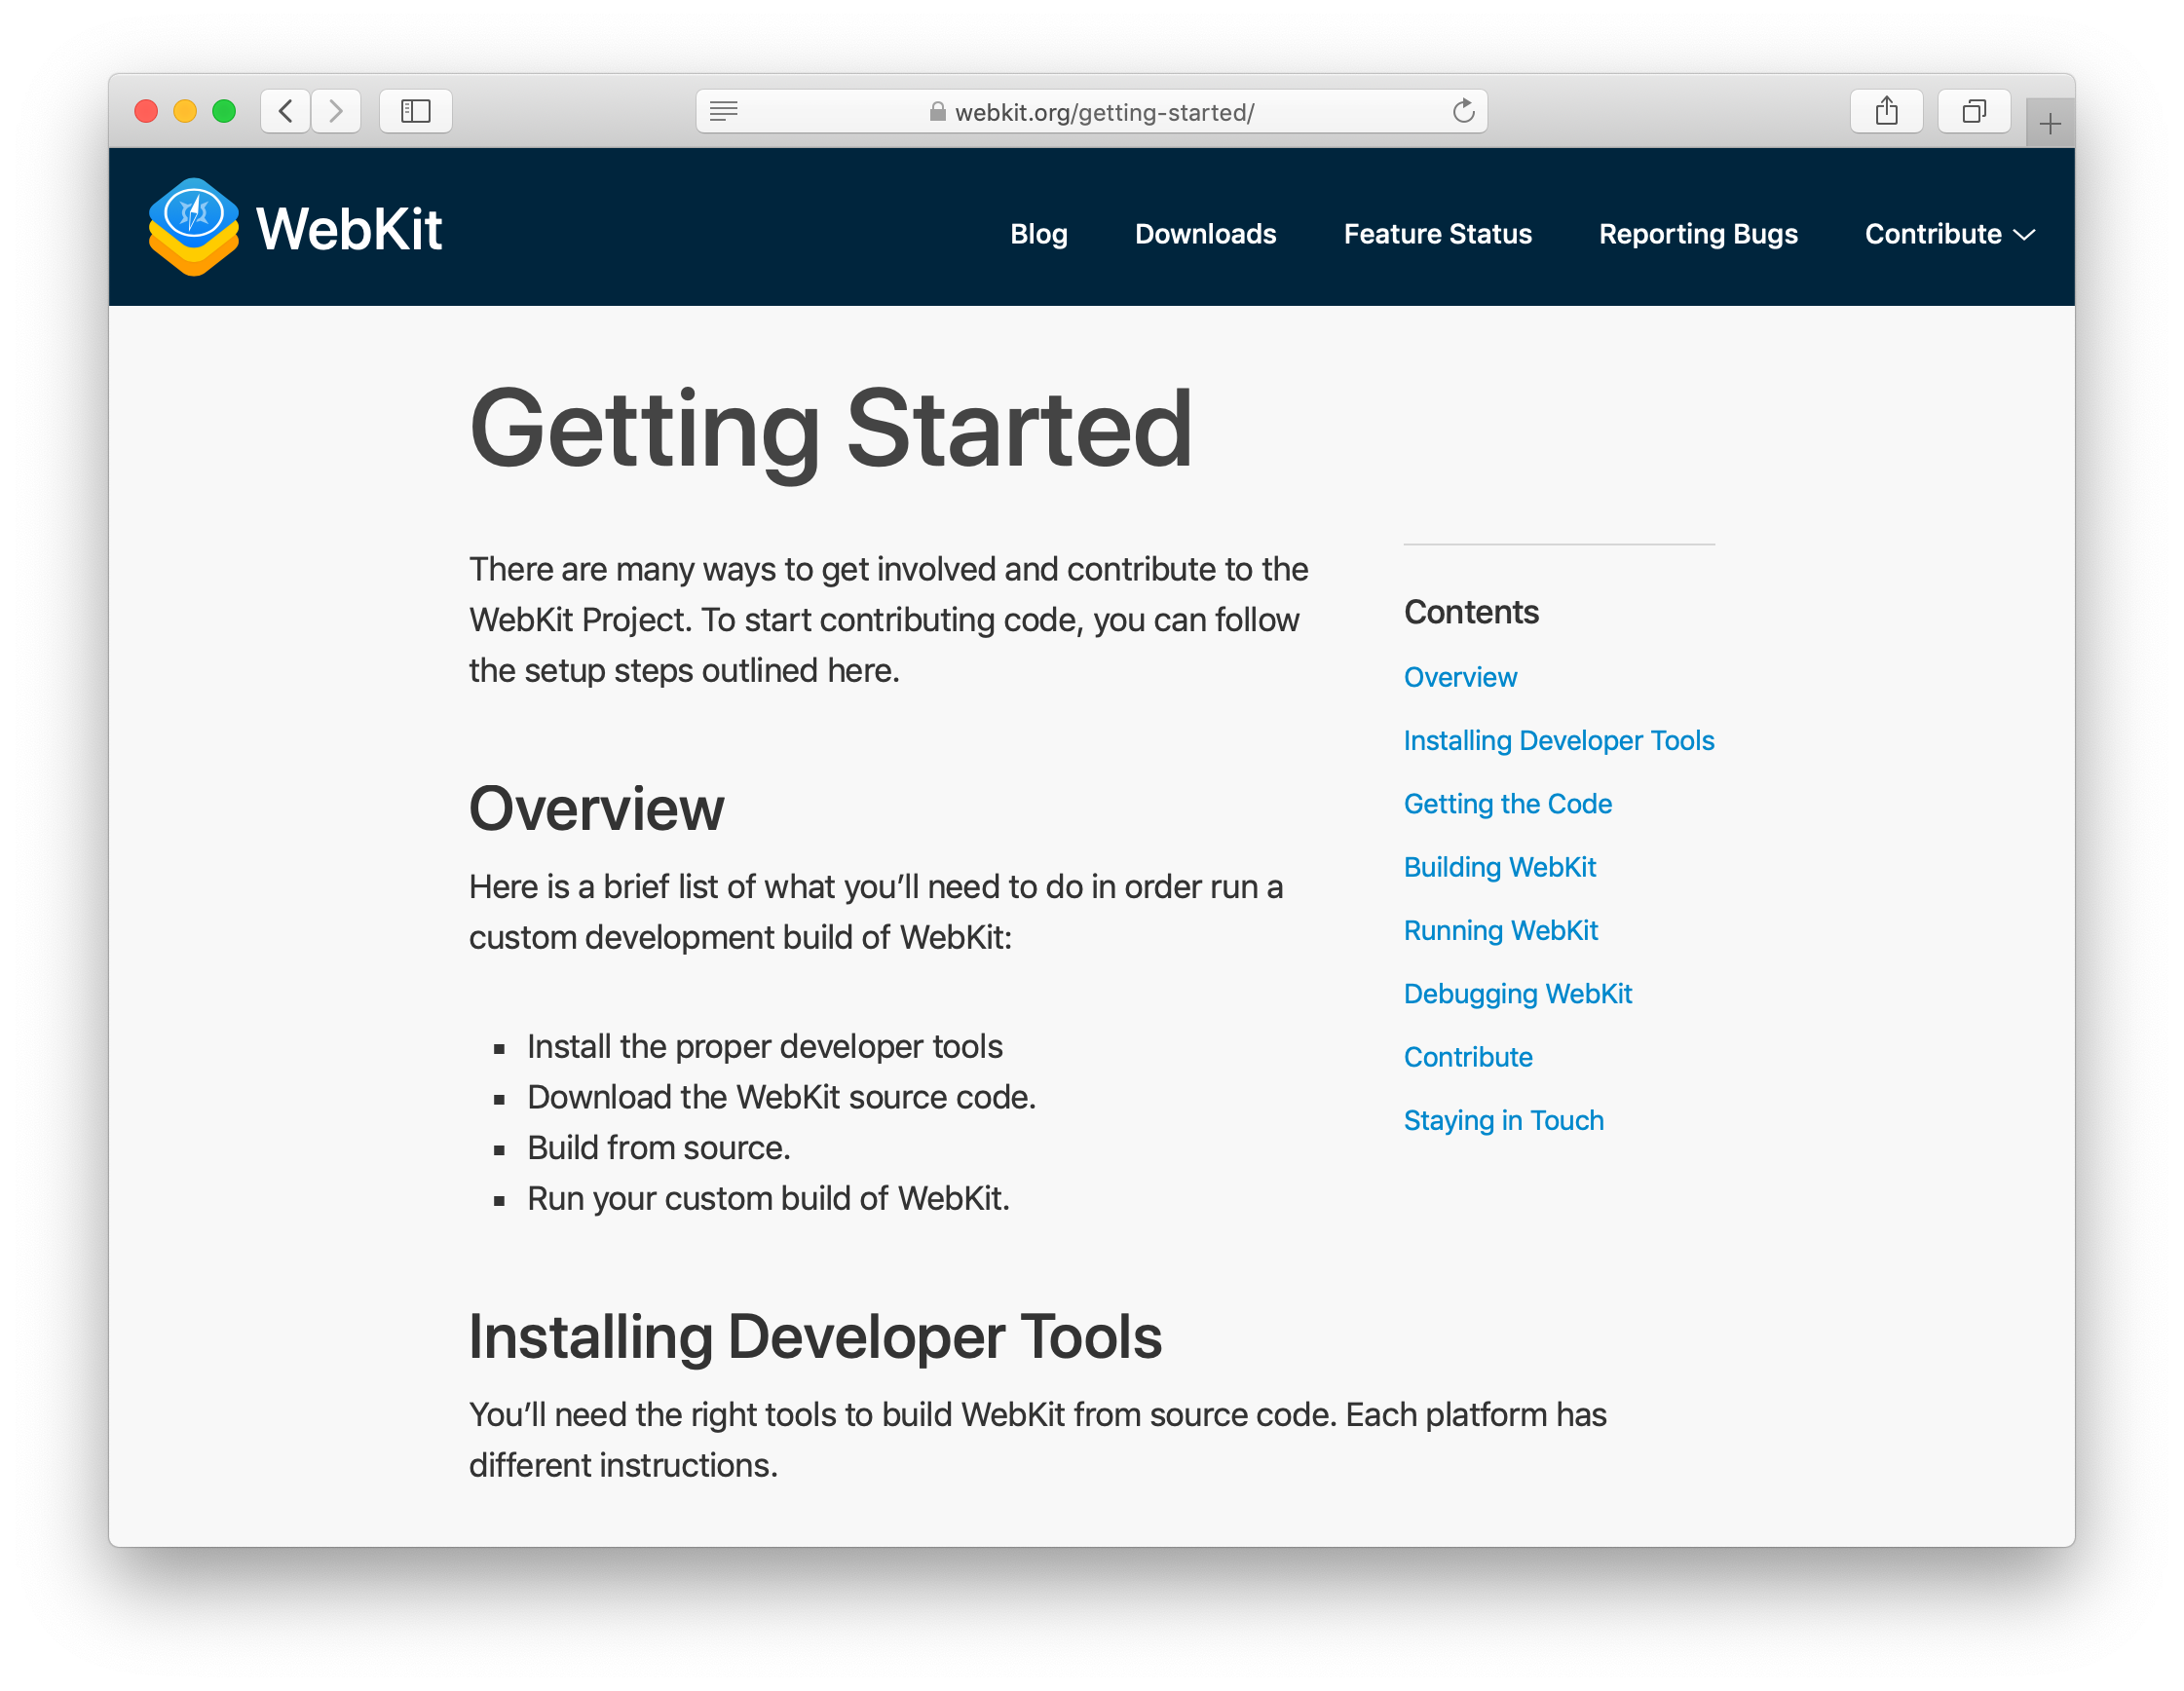 WebKit.org Getting Started page shown in light mode